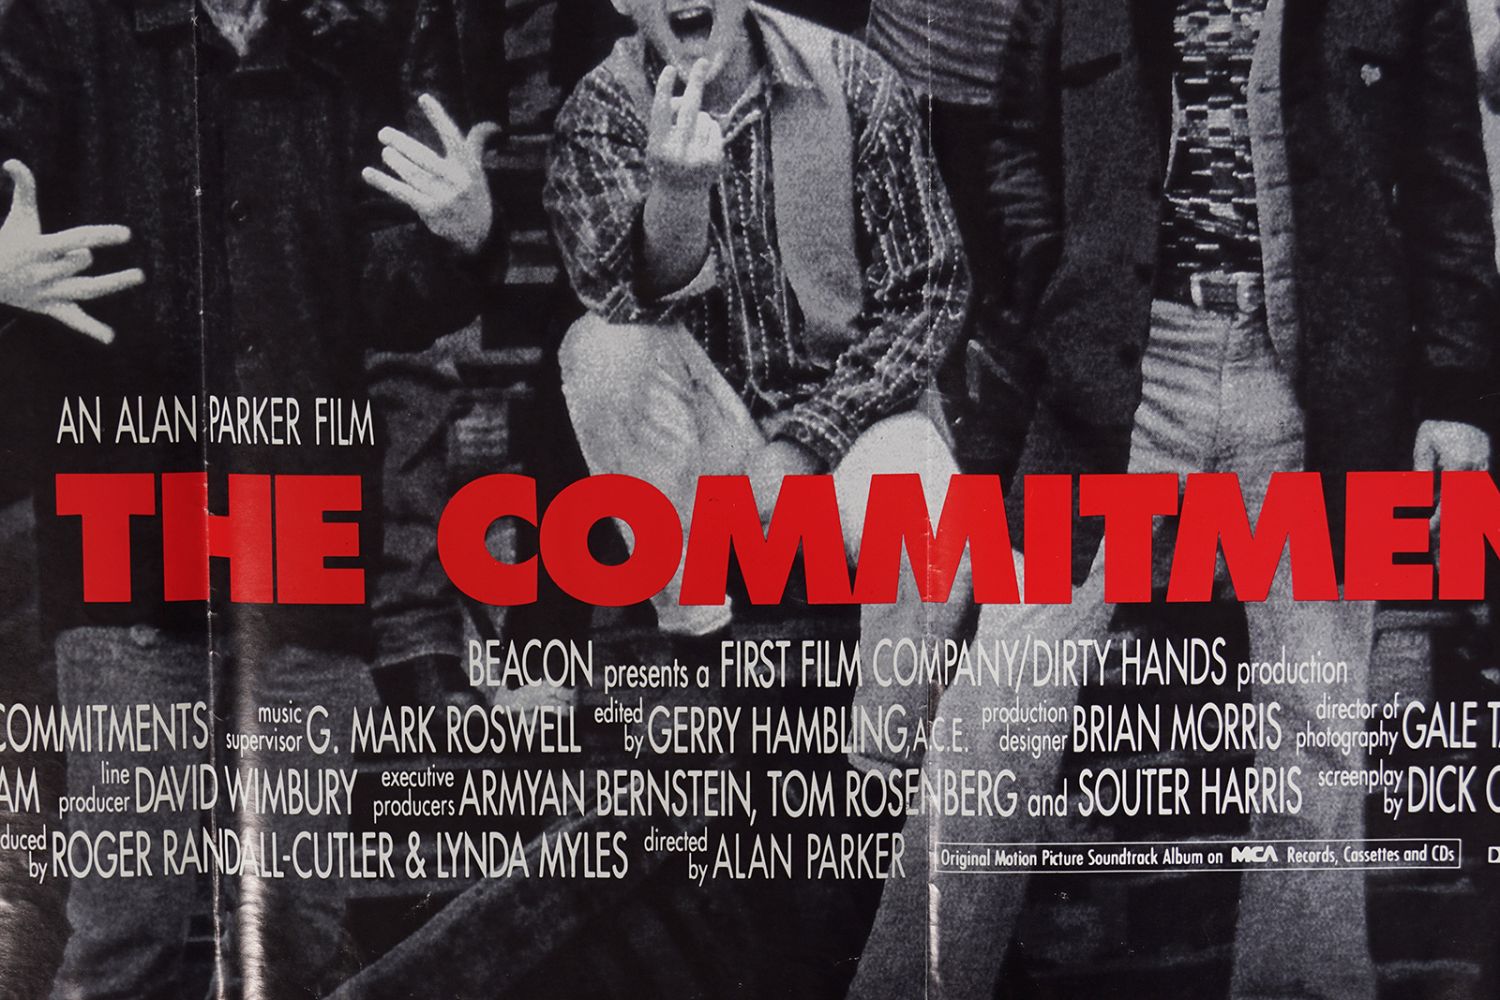 THE COMMITMENTS - Image 3 of 3